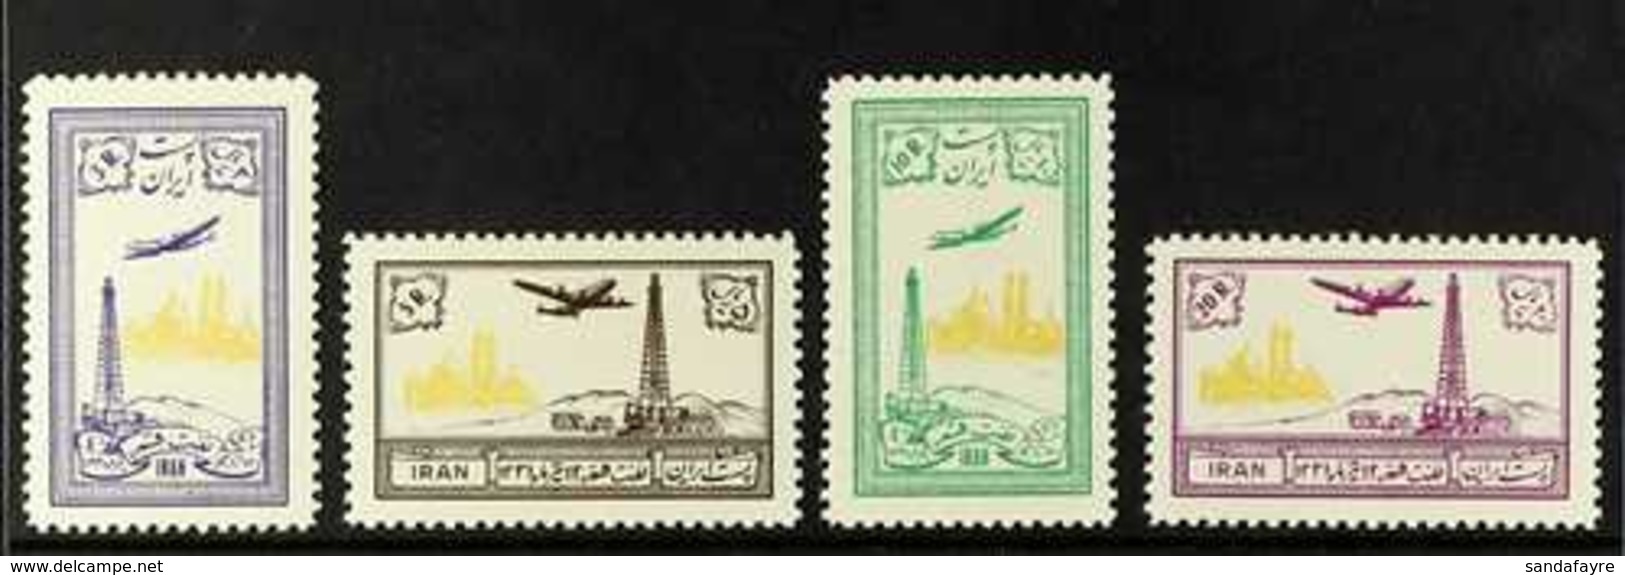 1953 Air Post "Discovery Of Oil" Set, Scott C79/82, SG 1003/1006, Never Hinged Mint (4 Stamps) For More Images, Please V - Iran